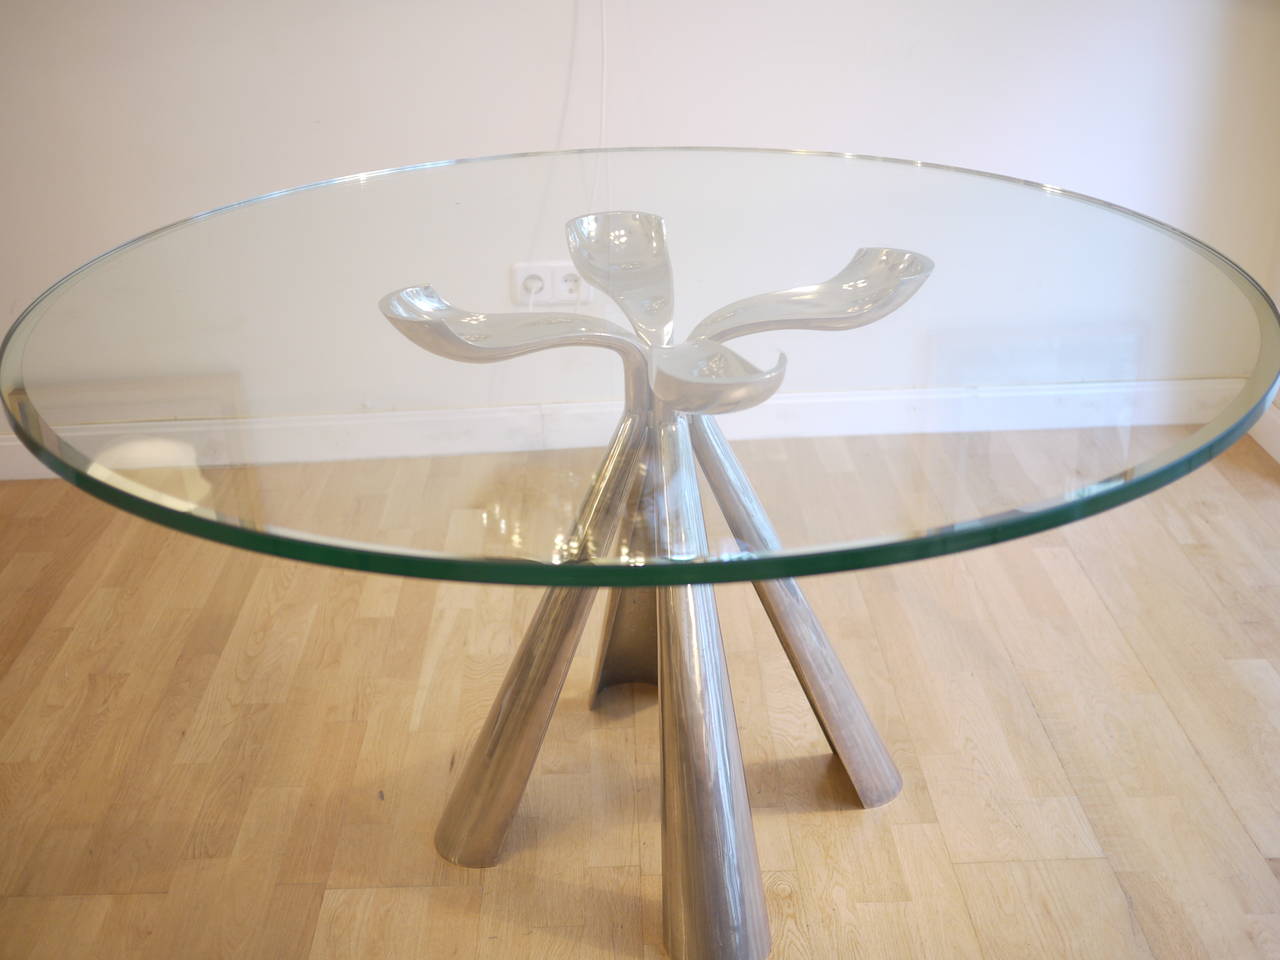 A  large dining table designed by Vittorio Introini for Saporiti in 1972.Cast aluminum glas on chromed  cast steel base.